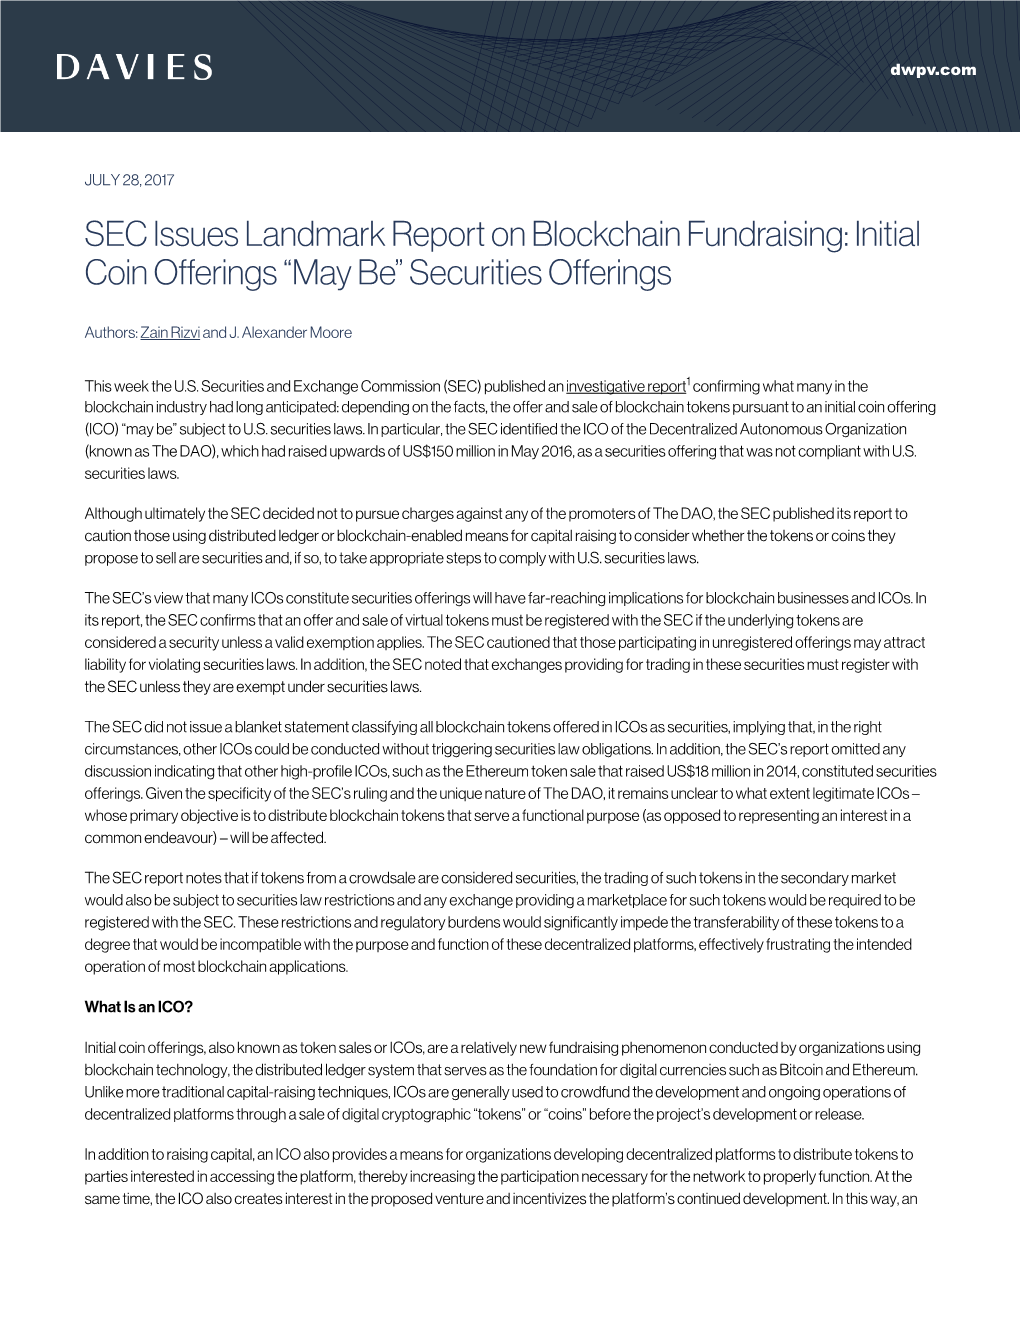 SEC Issues Landmark Report on Blockchain Fundraising: Initial Coin Offerings “May Be” Securities Offerings